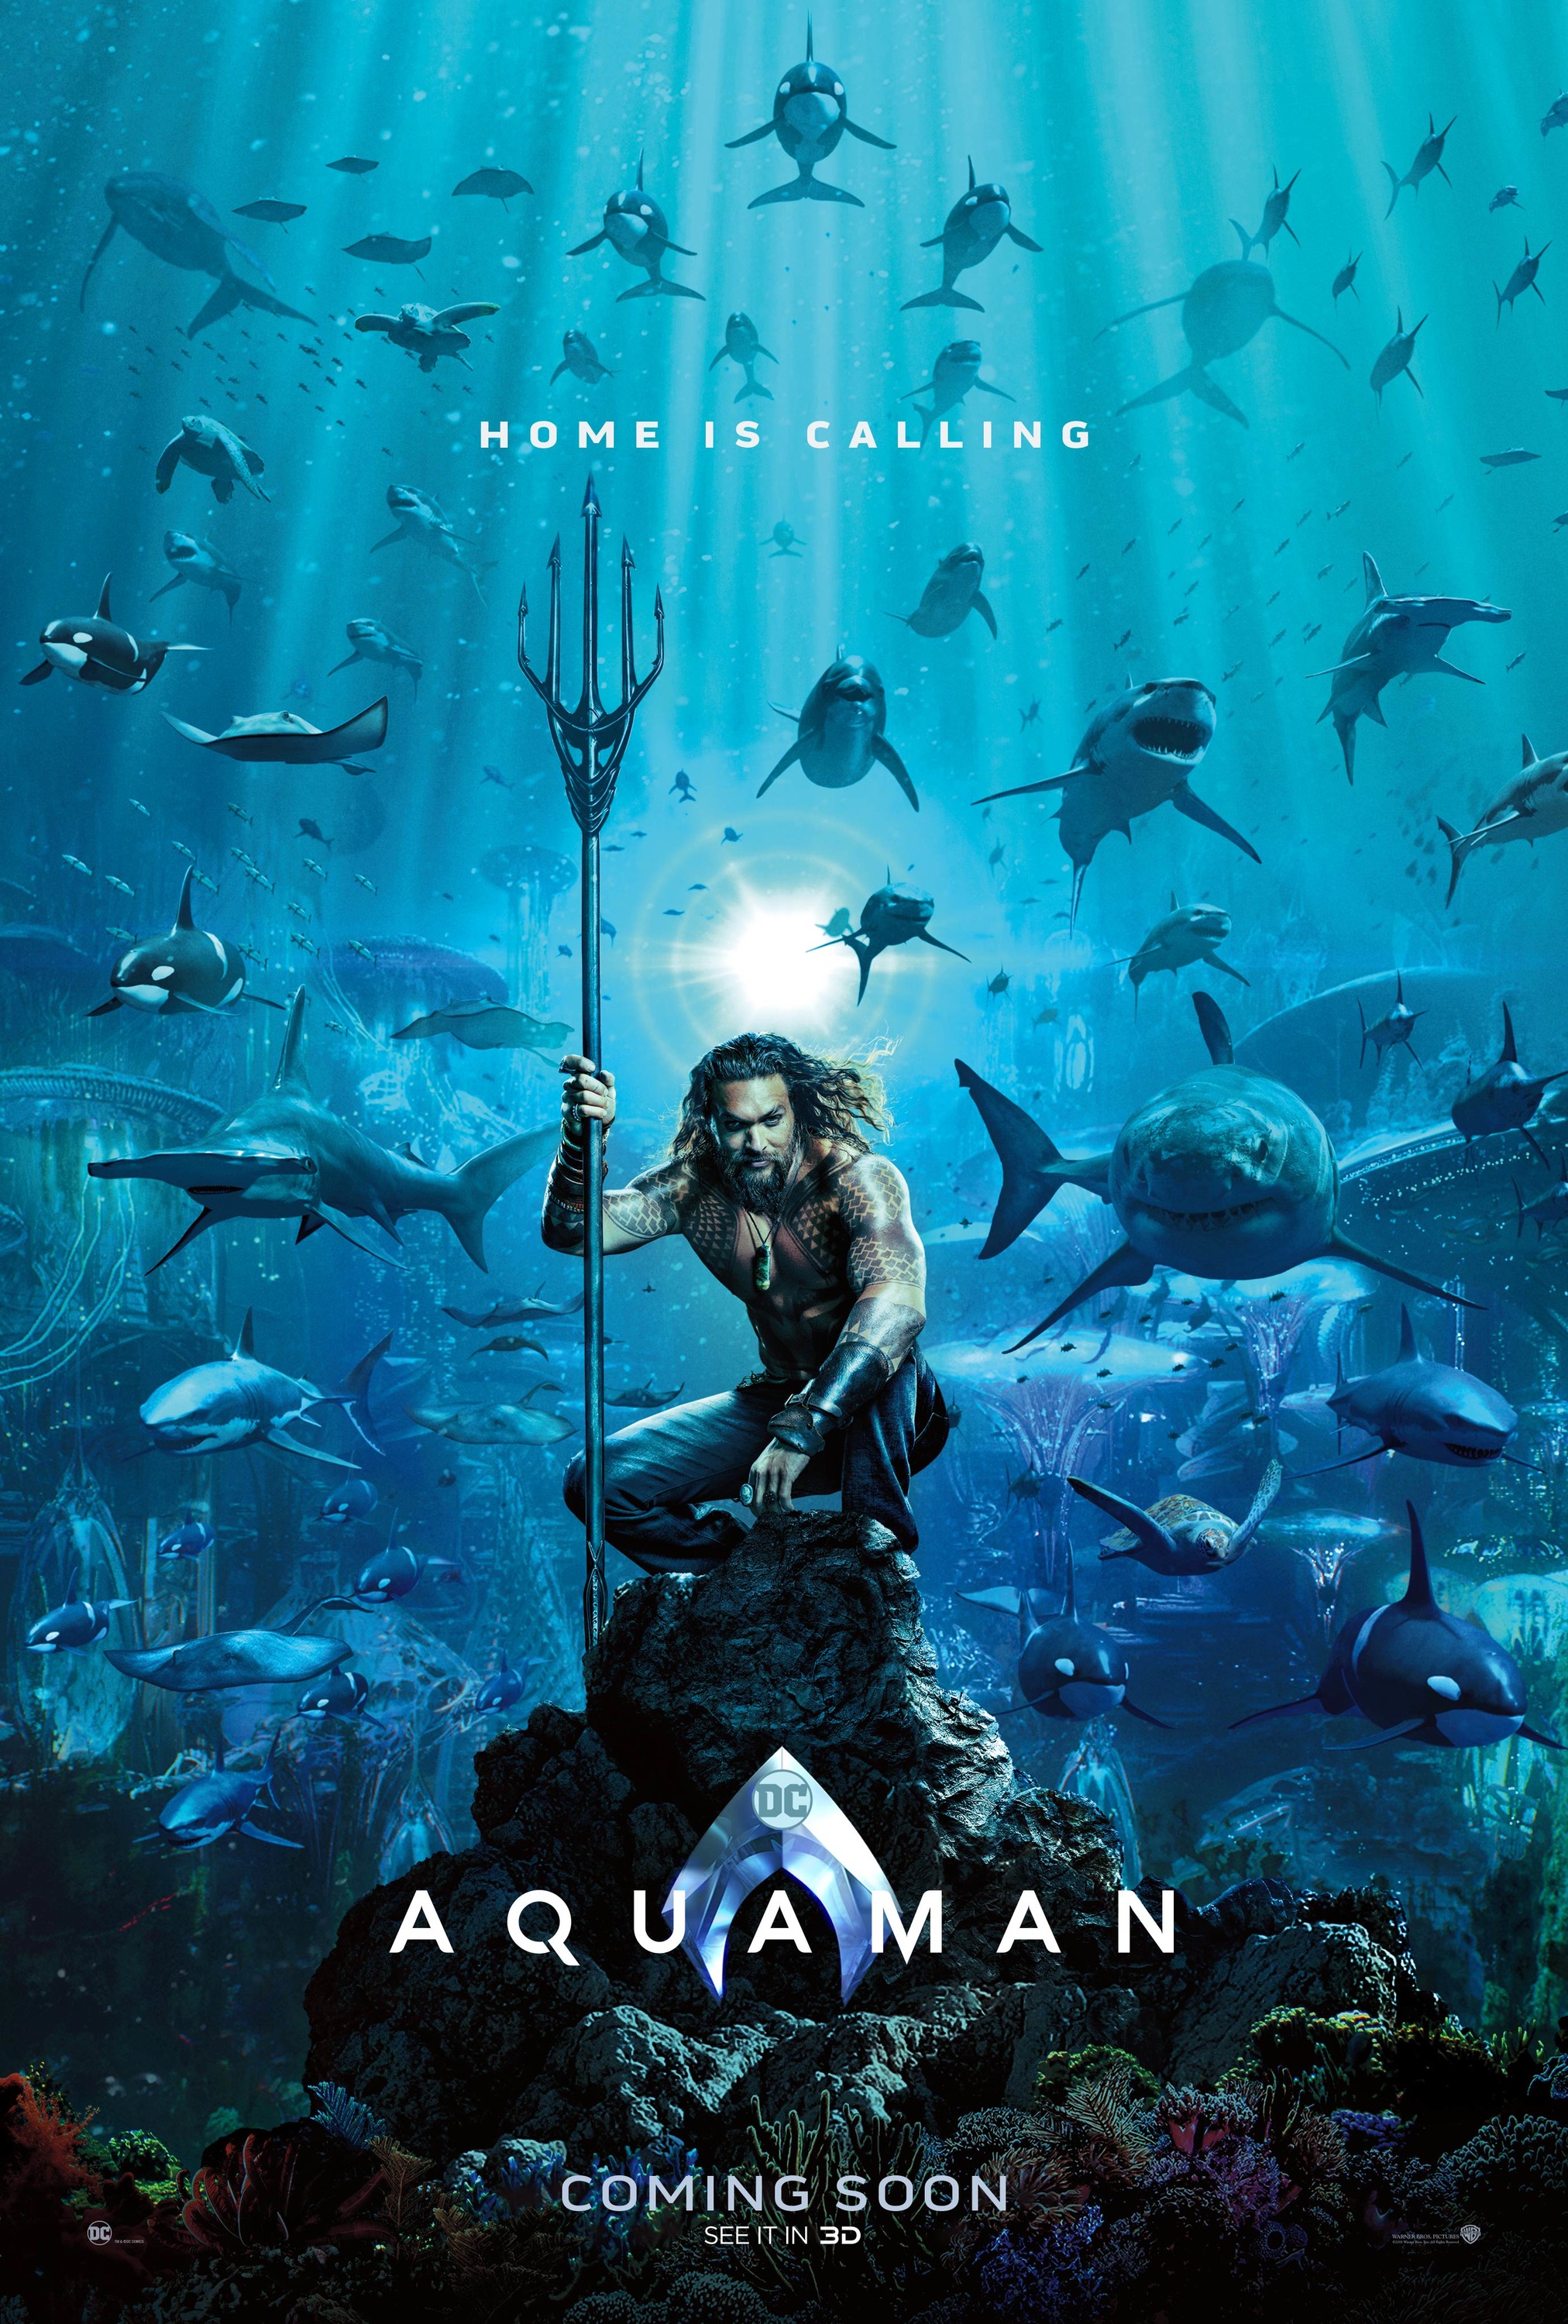 Aquaman film review: the DC hall of fame or shame?